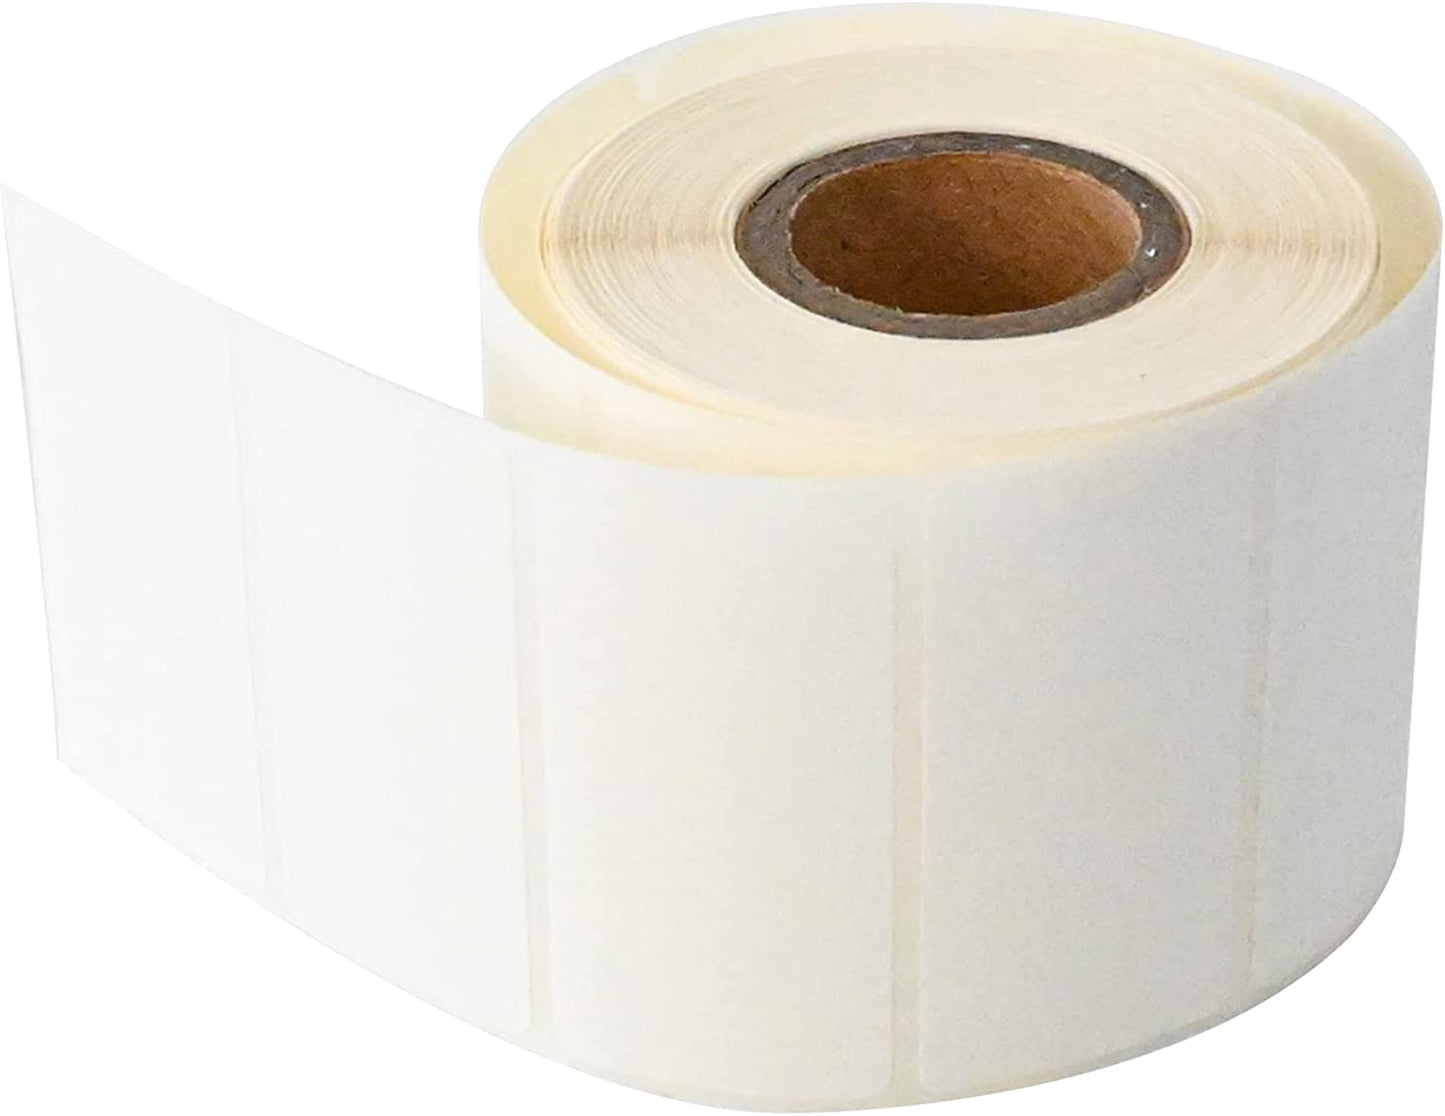 L LIKED 500 Stickers 2" X 1" White Dissolvable Food Labels for Containers -500 Labels/Roll